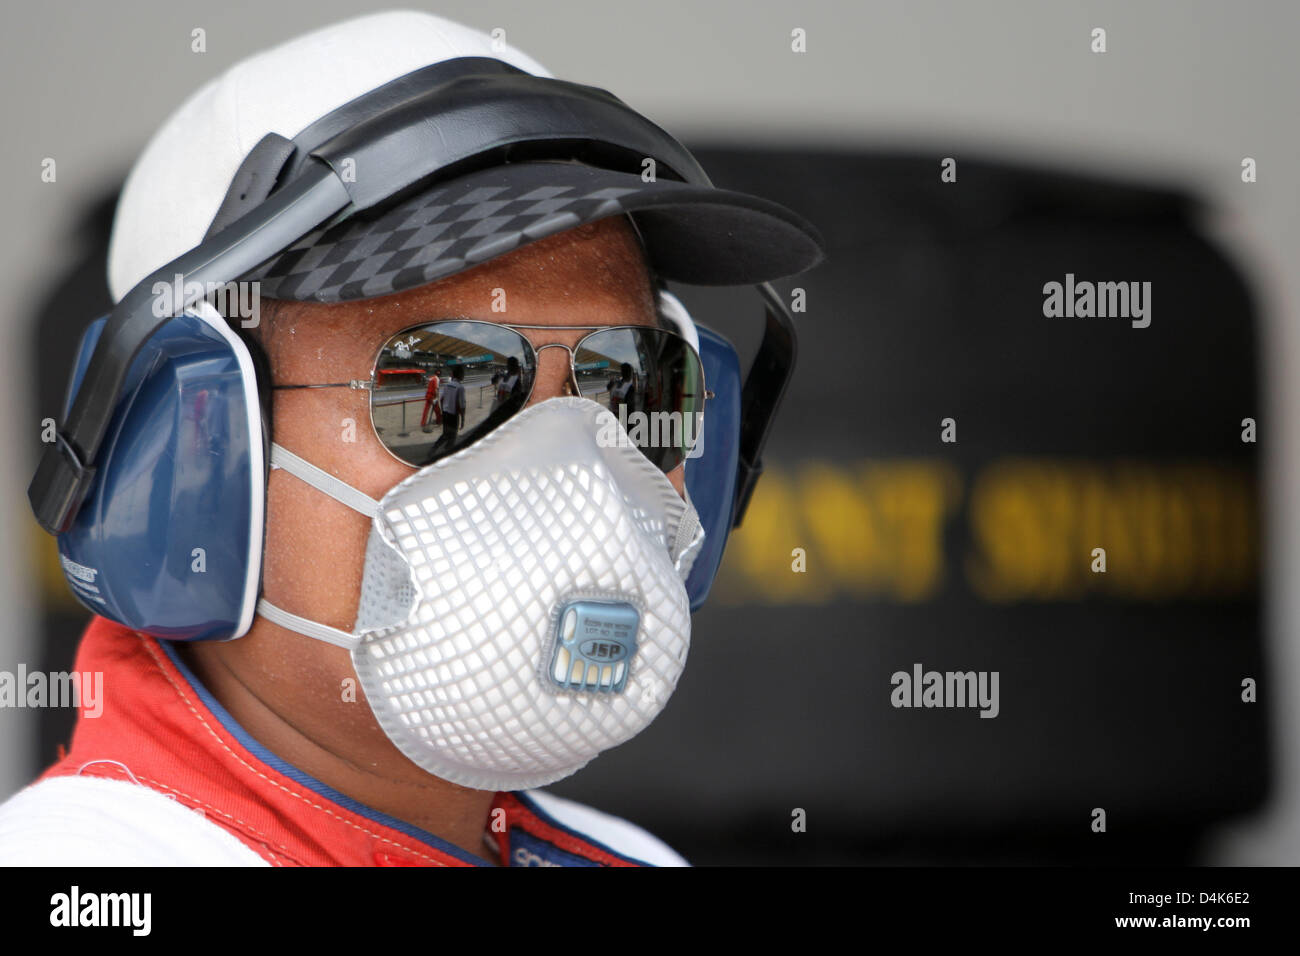 An official watches the thrid practice session at Sepang circuit near Kuala Lumpur, Malaysia, 04 April 2009. The 2009 Formula 1 Malaysian Grand Prix will take place on 05 April. Photo: Jens Buettner Stock Photo